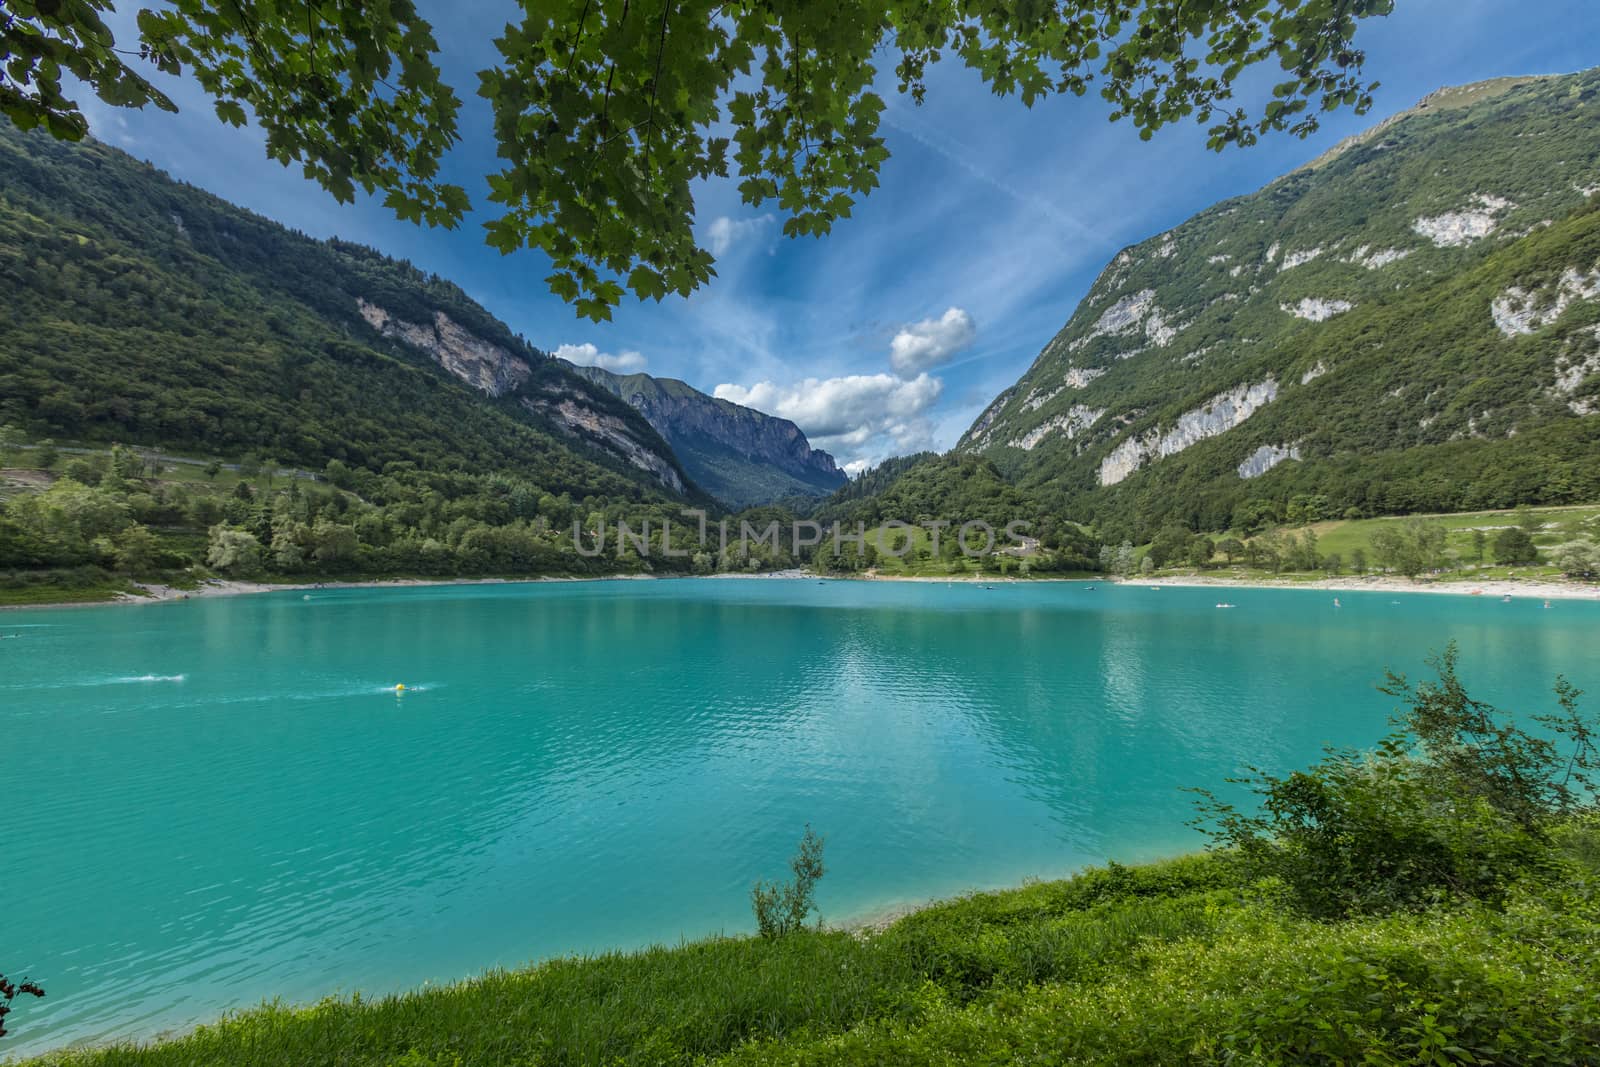 Tenno, Italy, Europe, August 2019, A view of Lake Tenno by ElectricEggPhoto